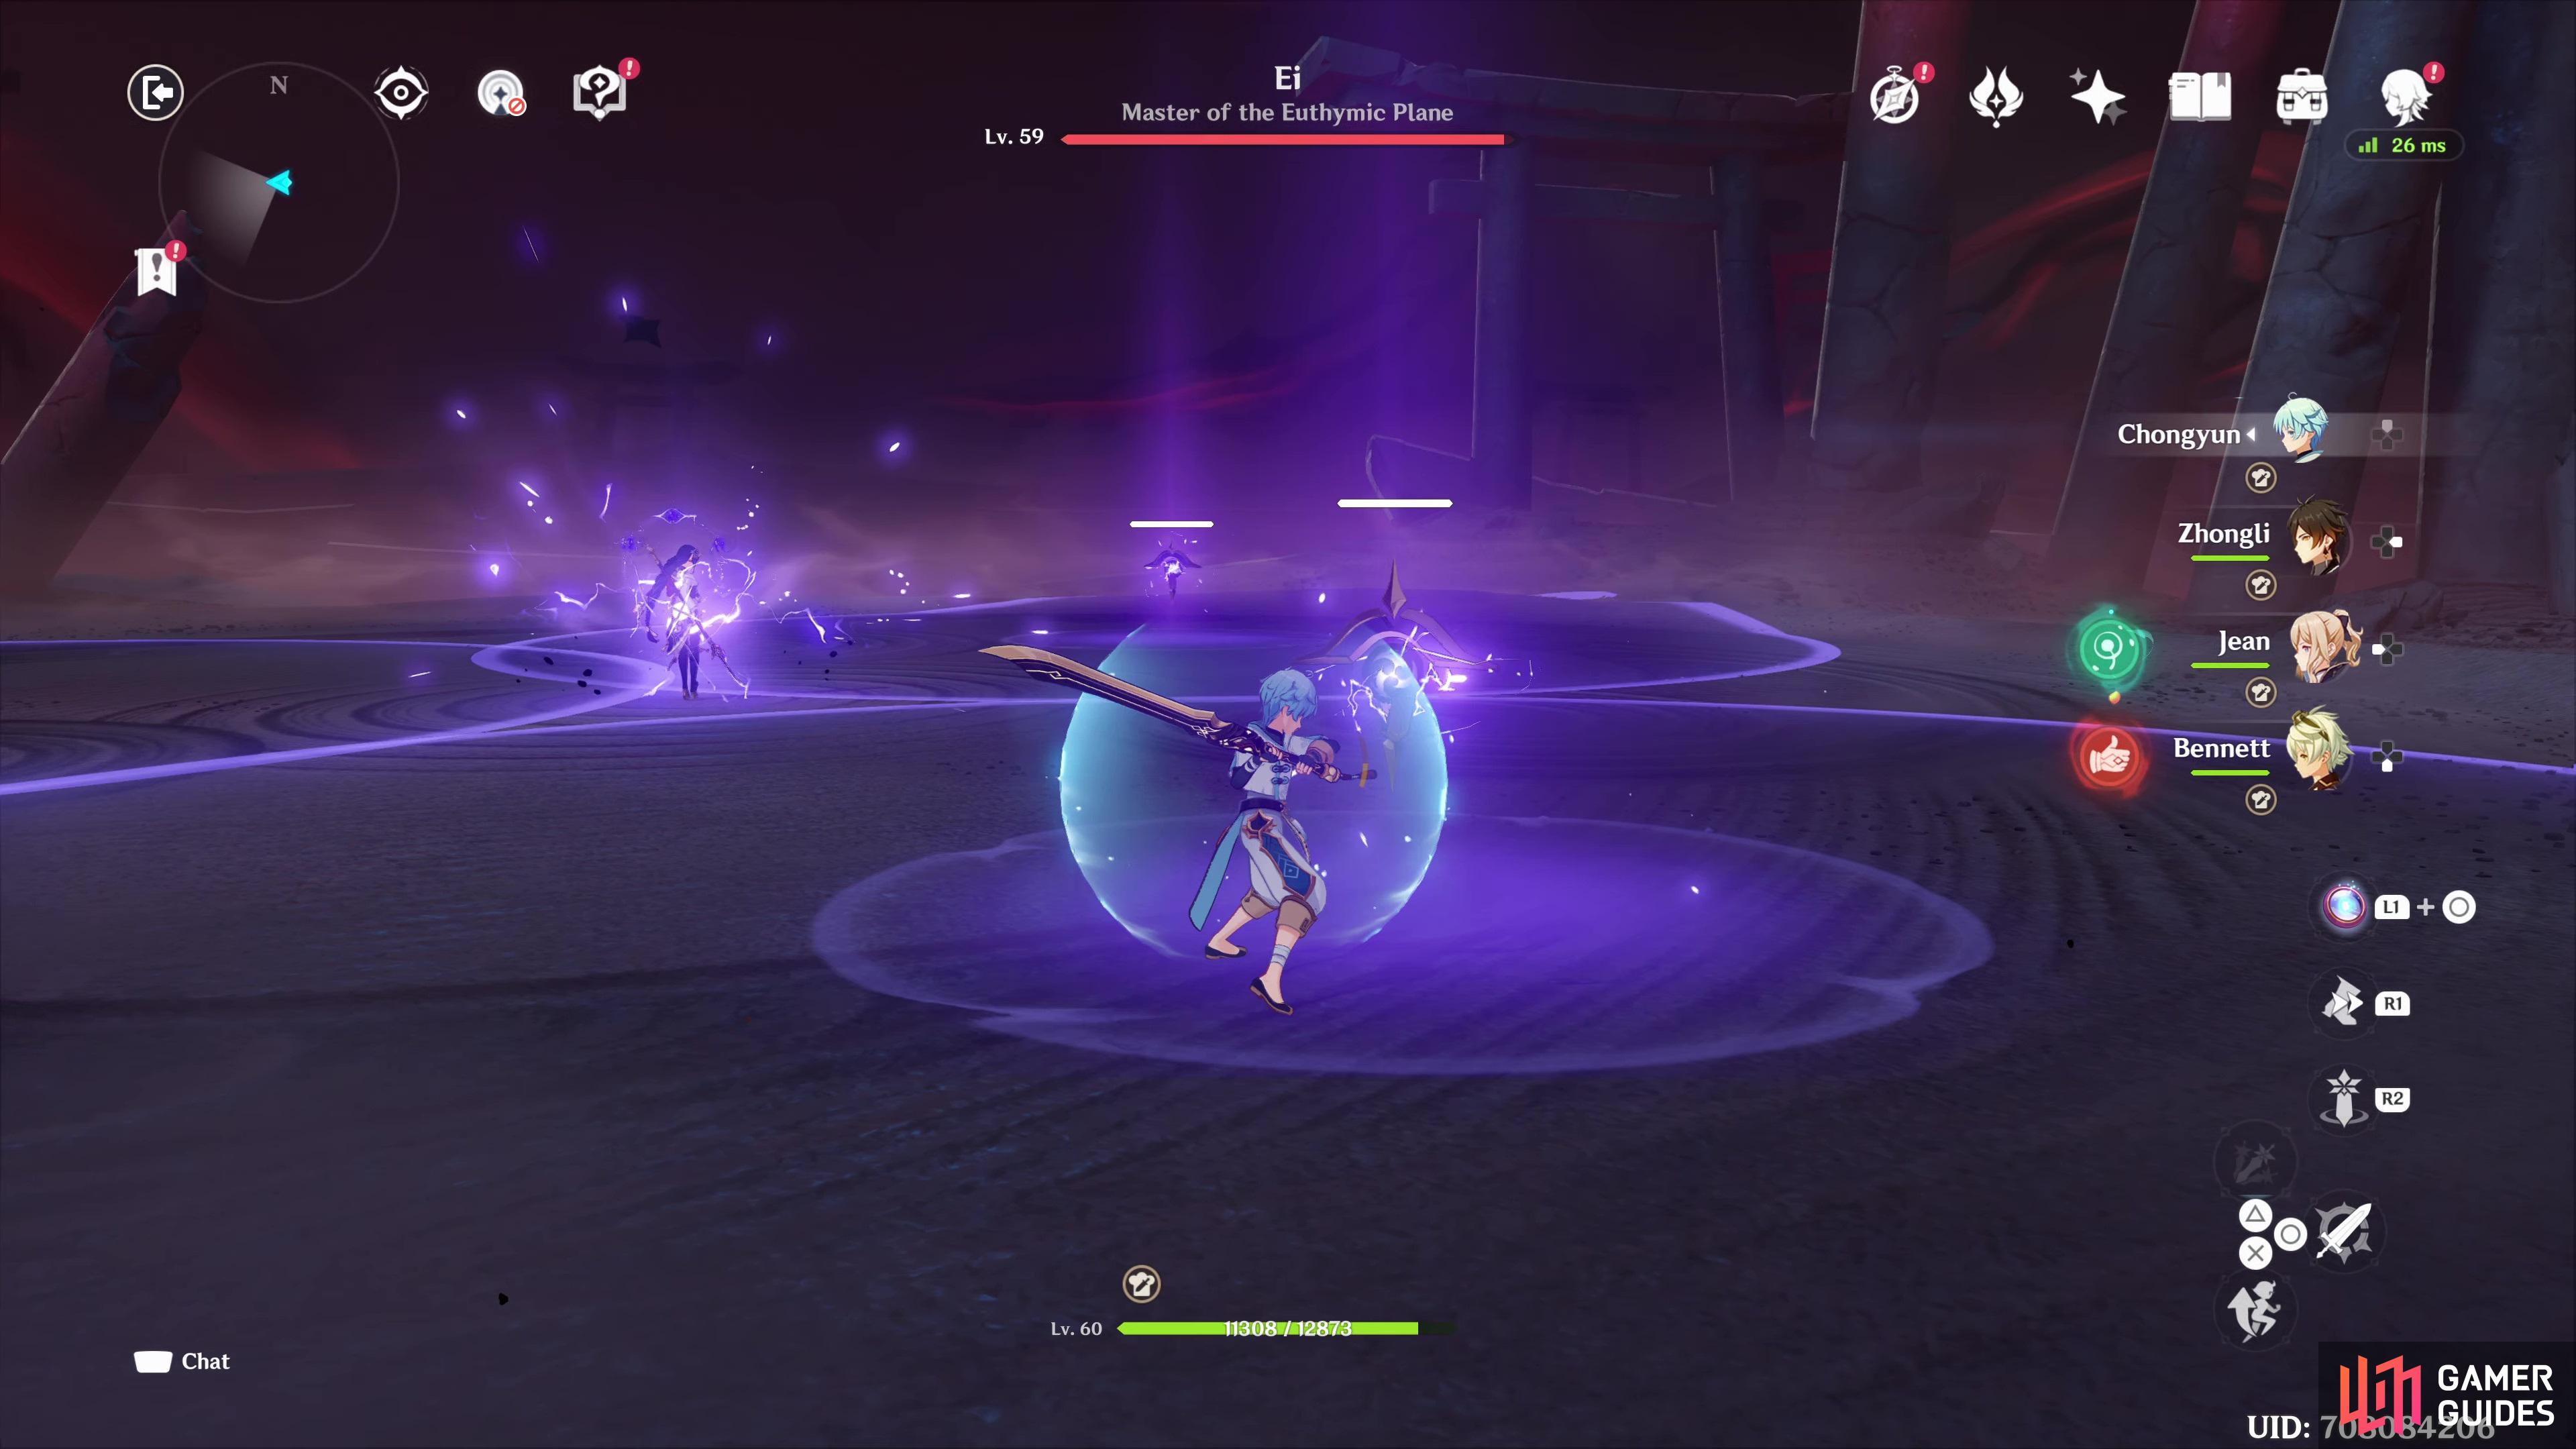 Destroy one of the electro orbs to avoid being hit by the AoE. 